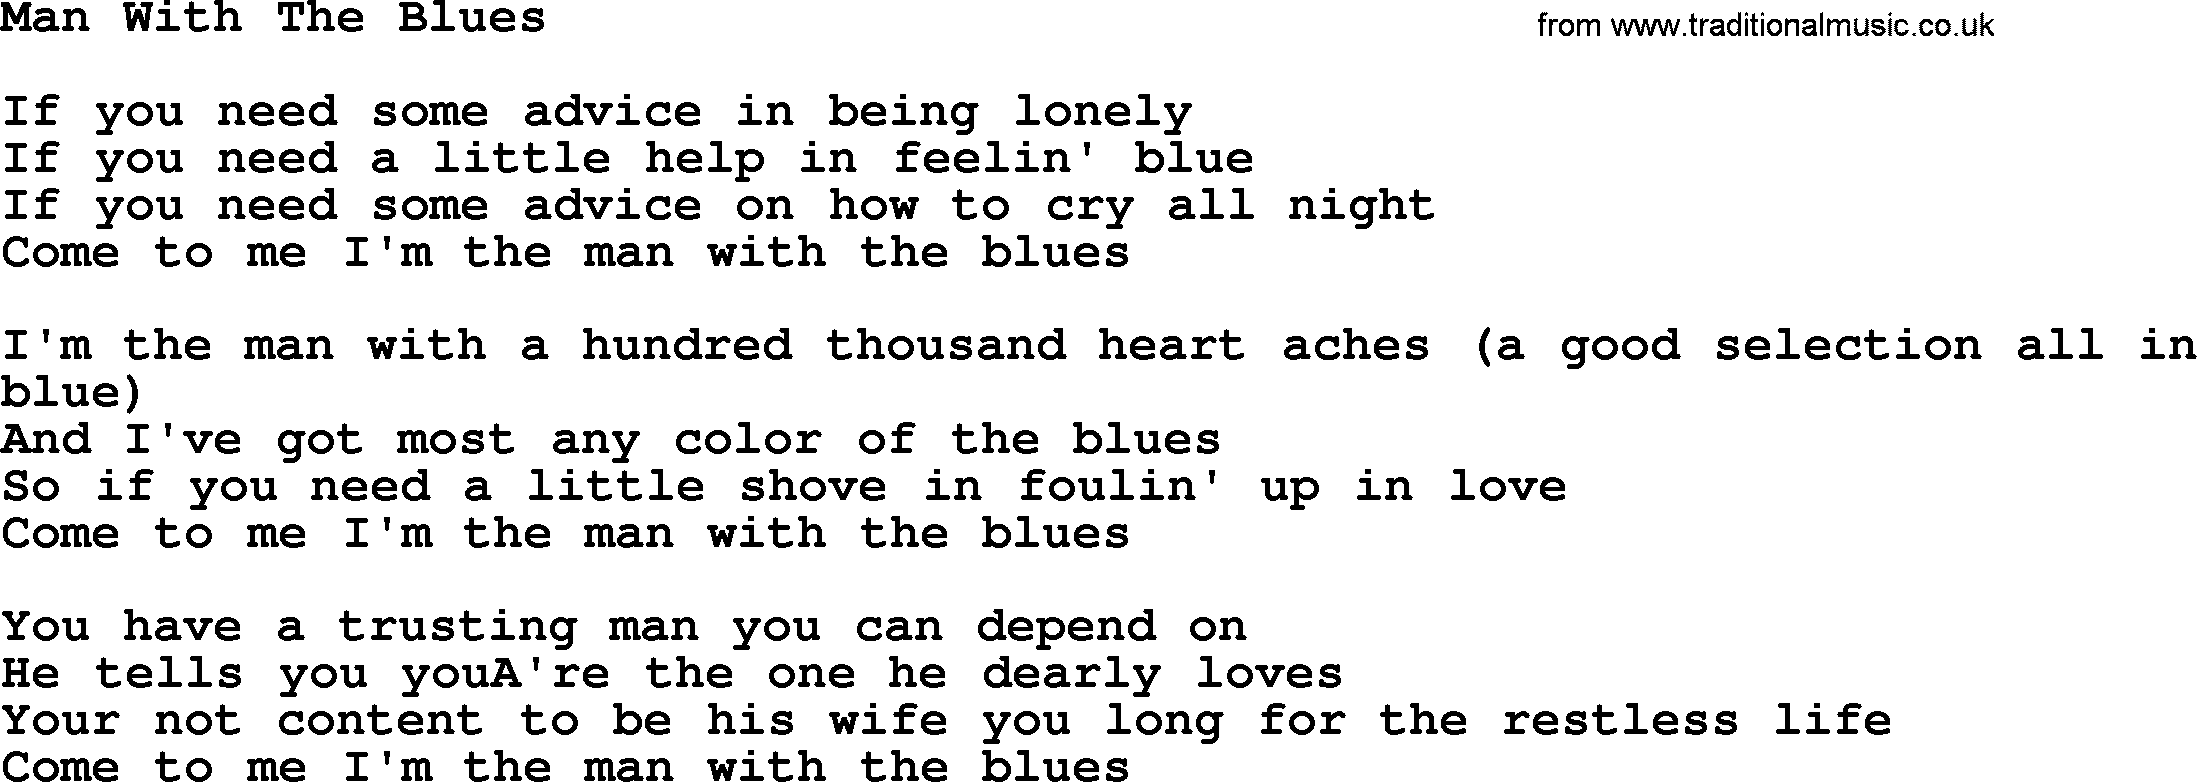 Willie Nelson song: Man With The Blues lyrics